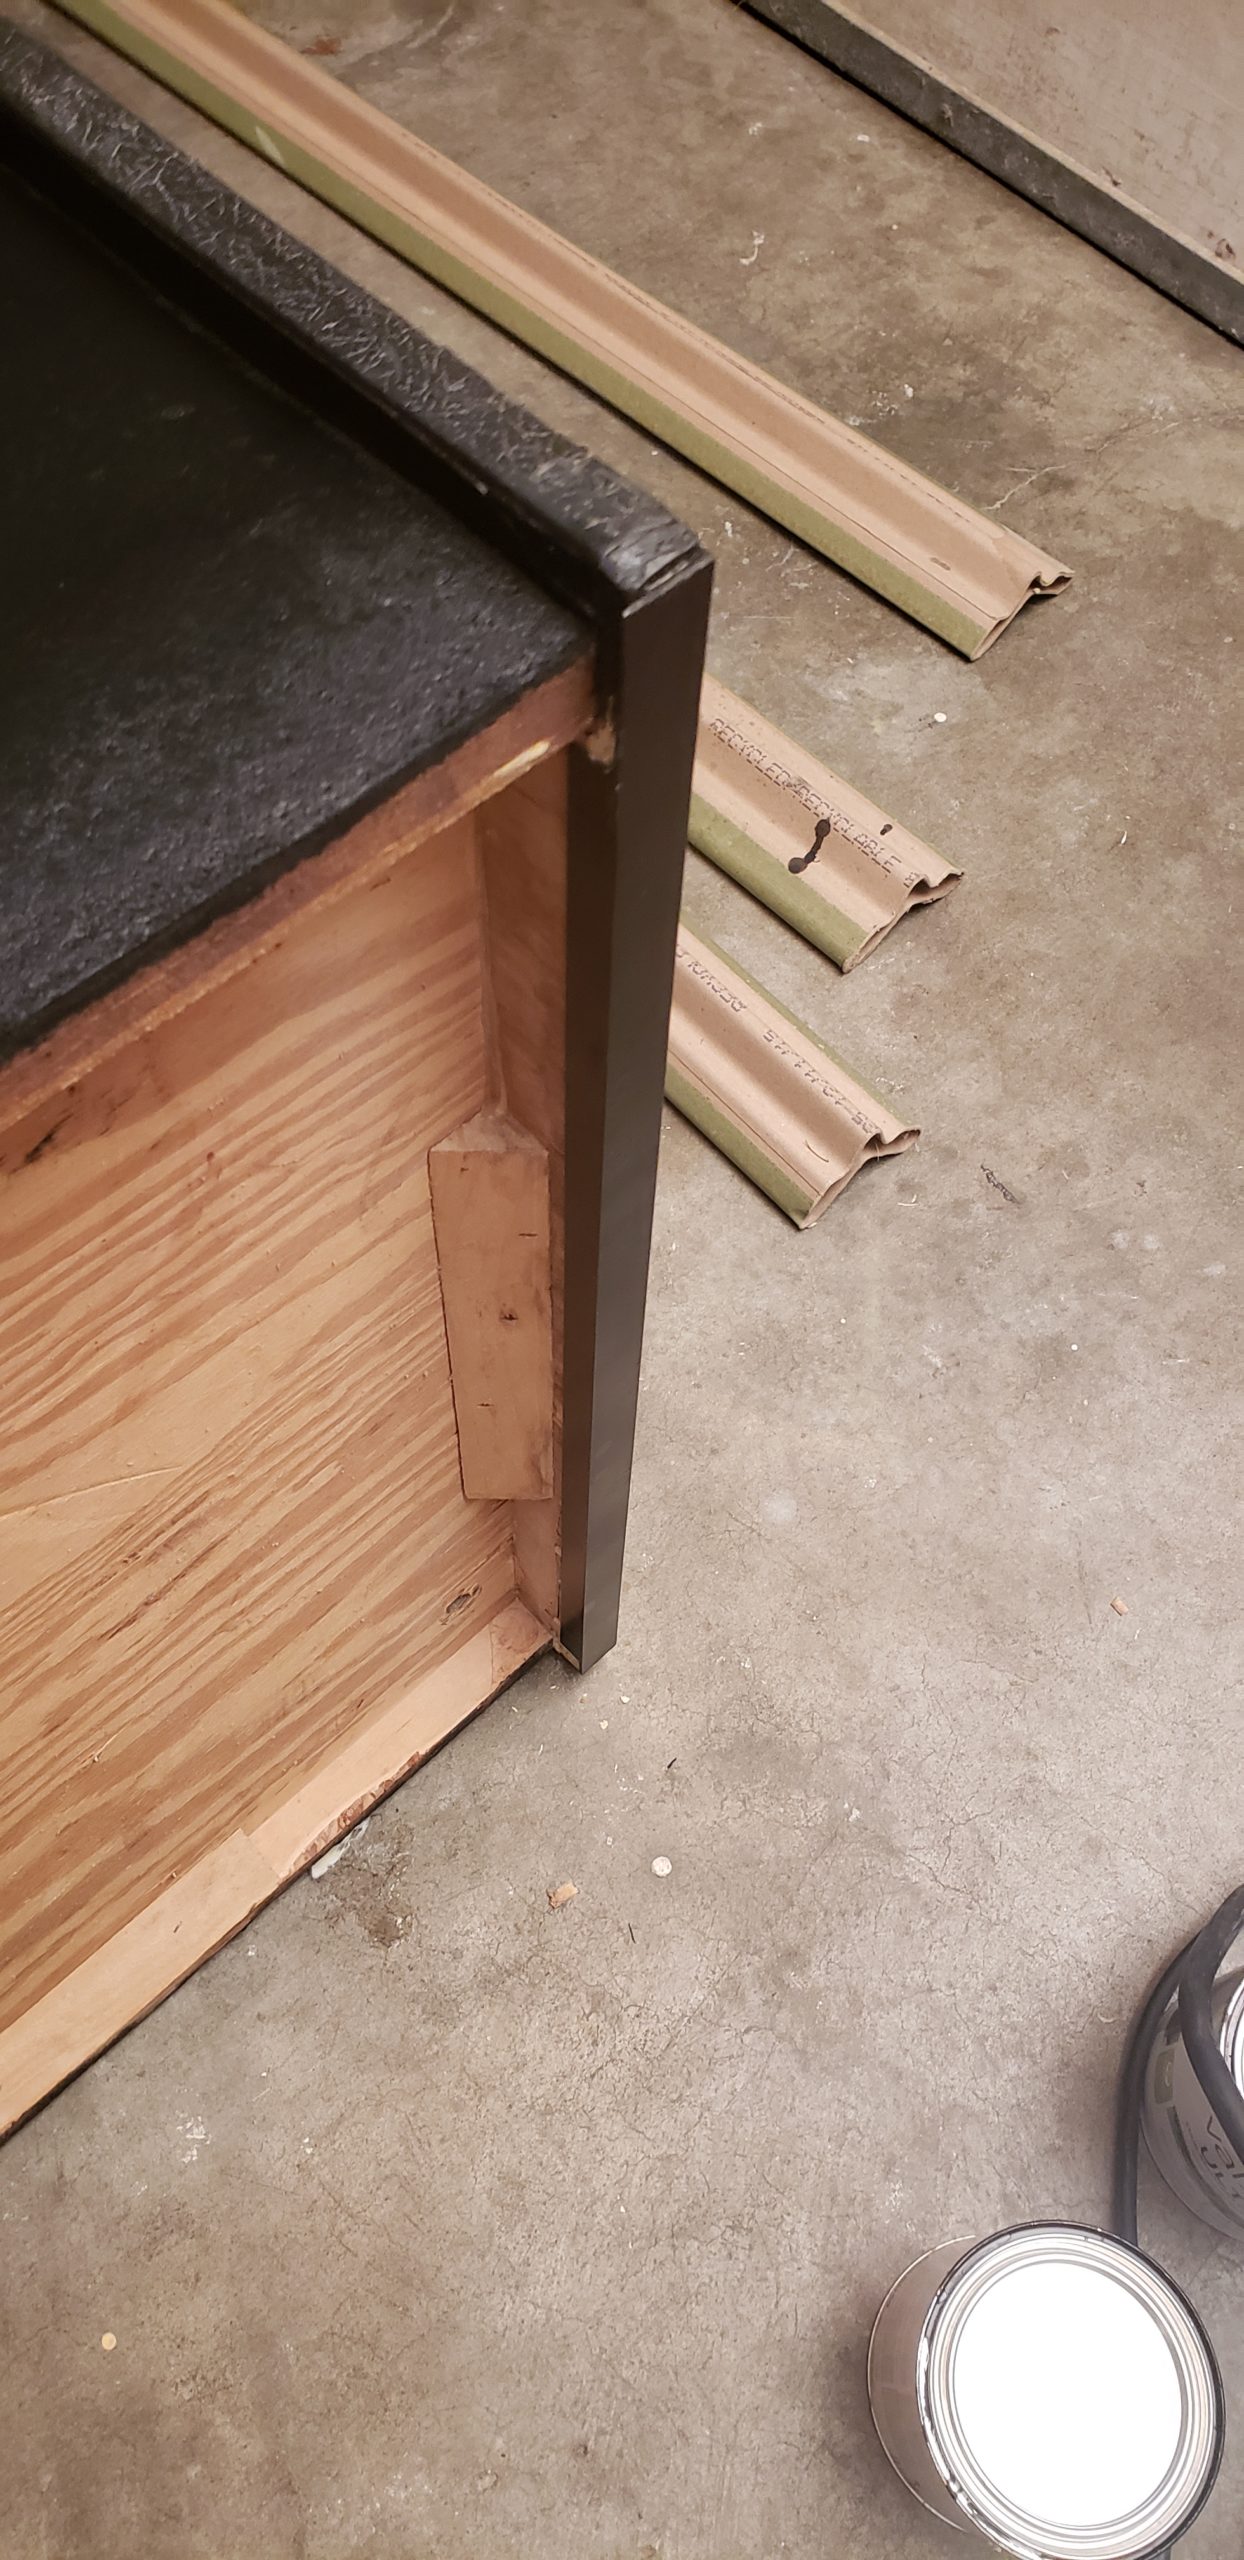 bottom of cabinet with metal channeling in place